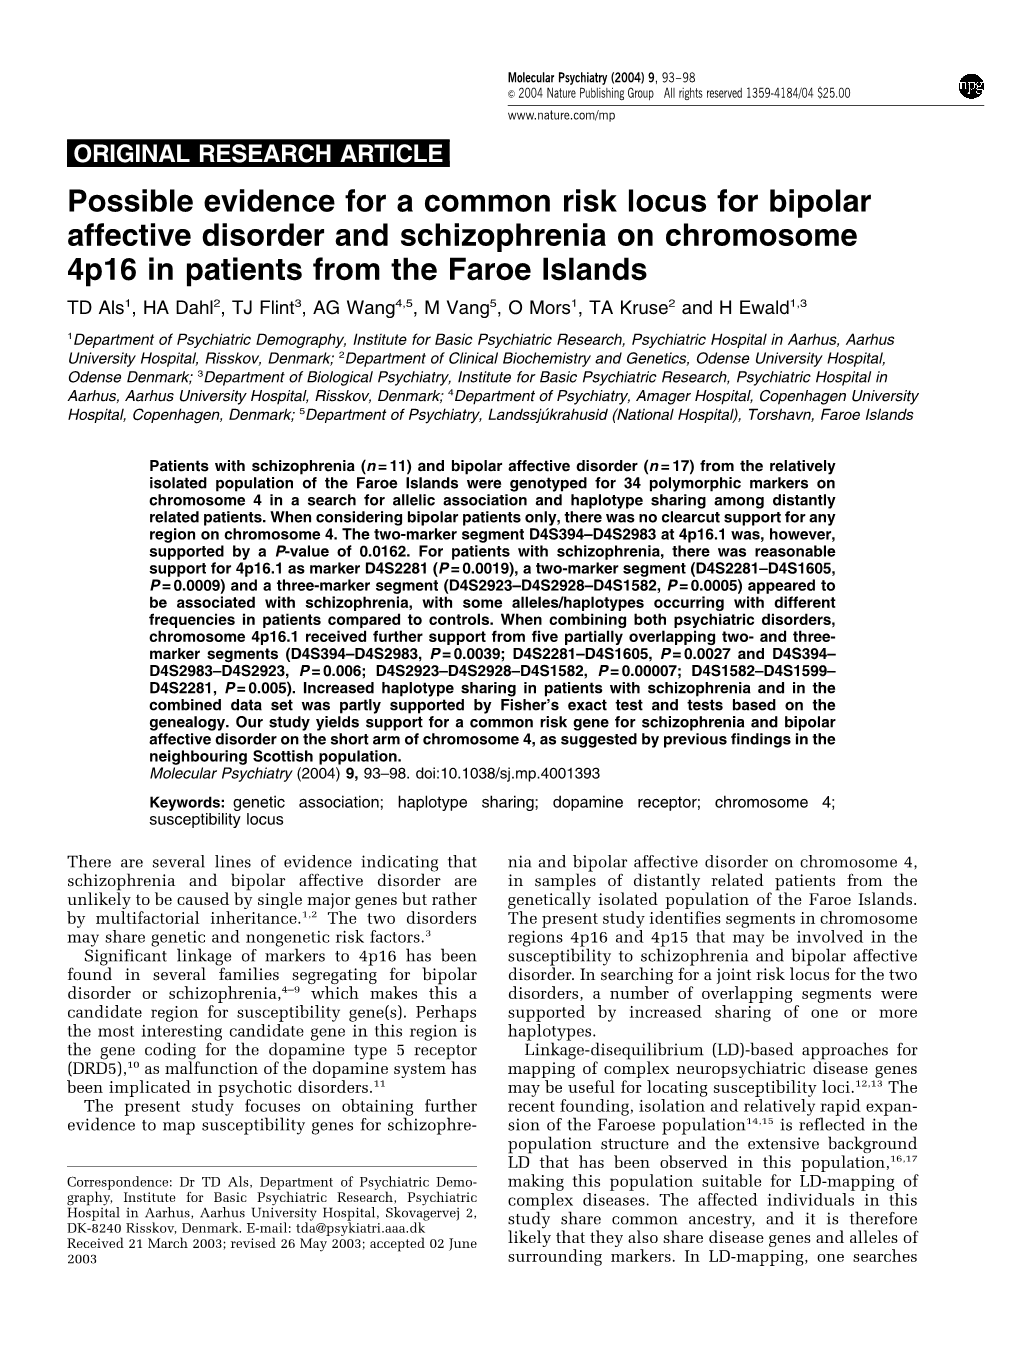 Possible Evidence for a Common Risk Locus for Bipolar Affective Disorder